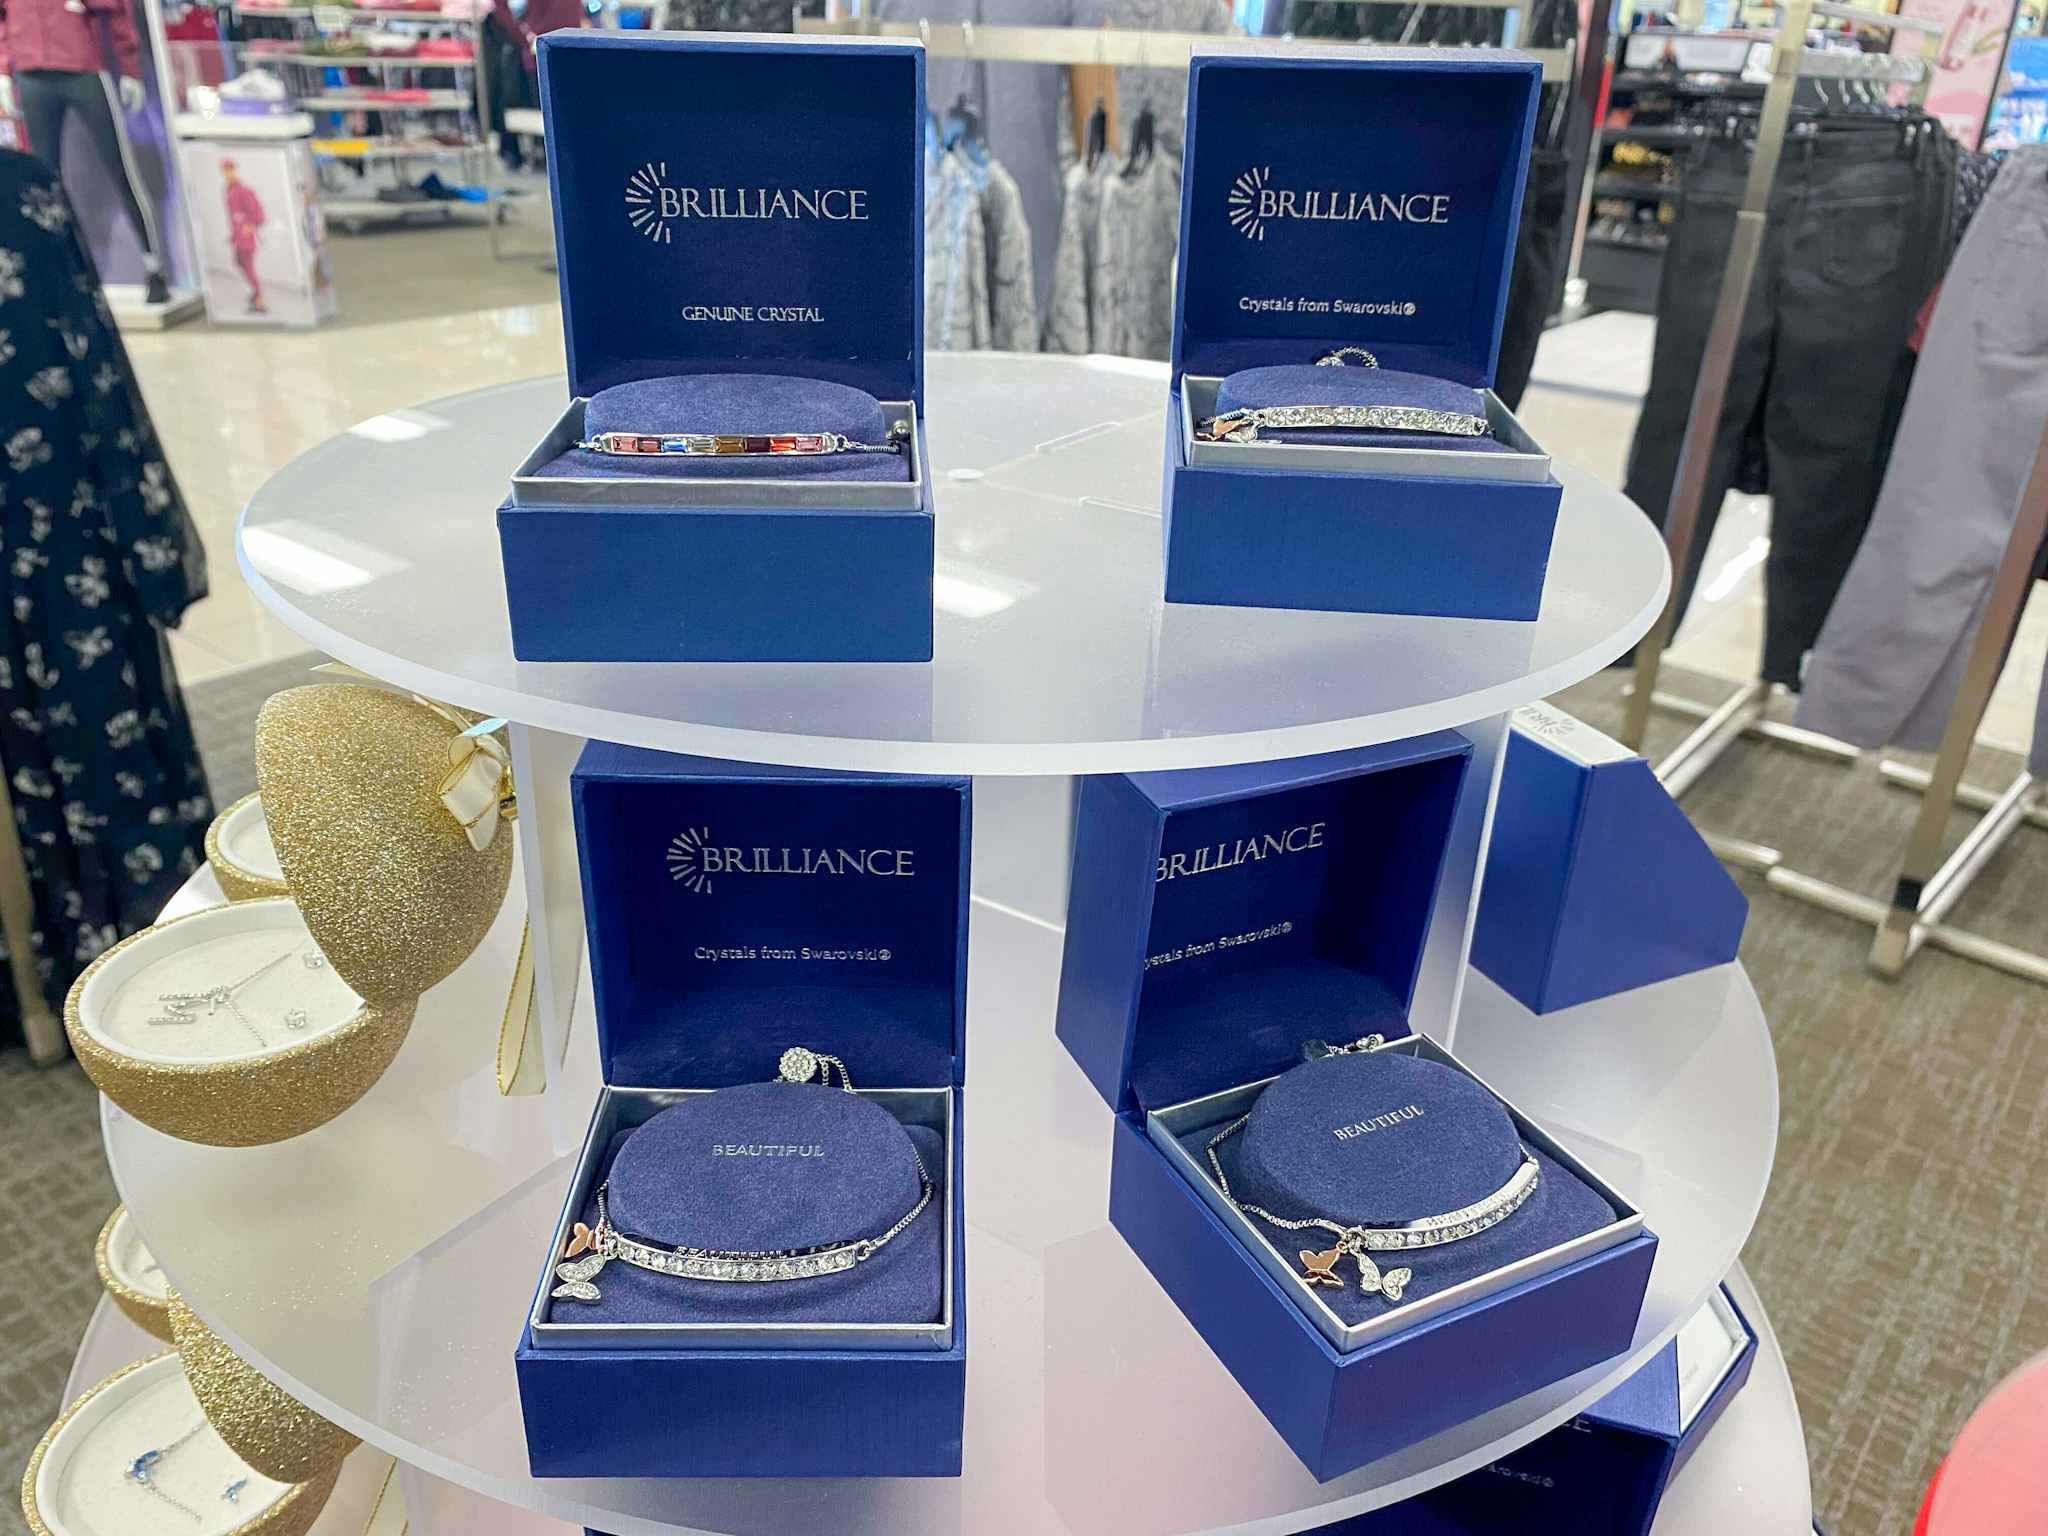 kohls brilliance valentines day jewelry in store image 2022